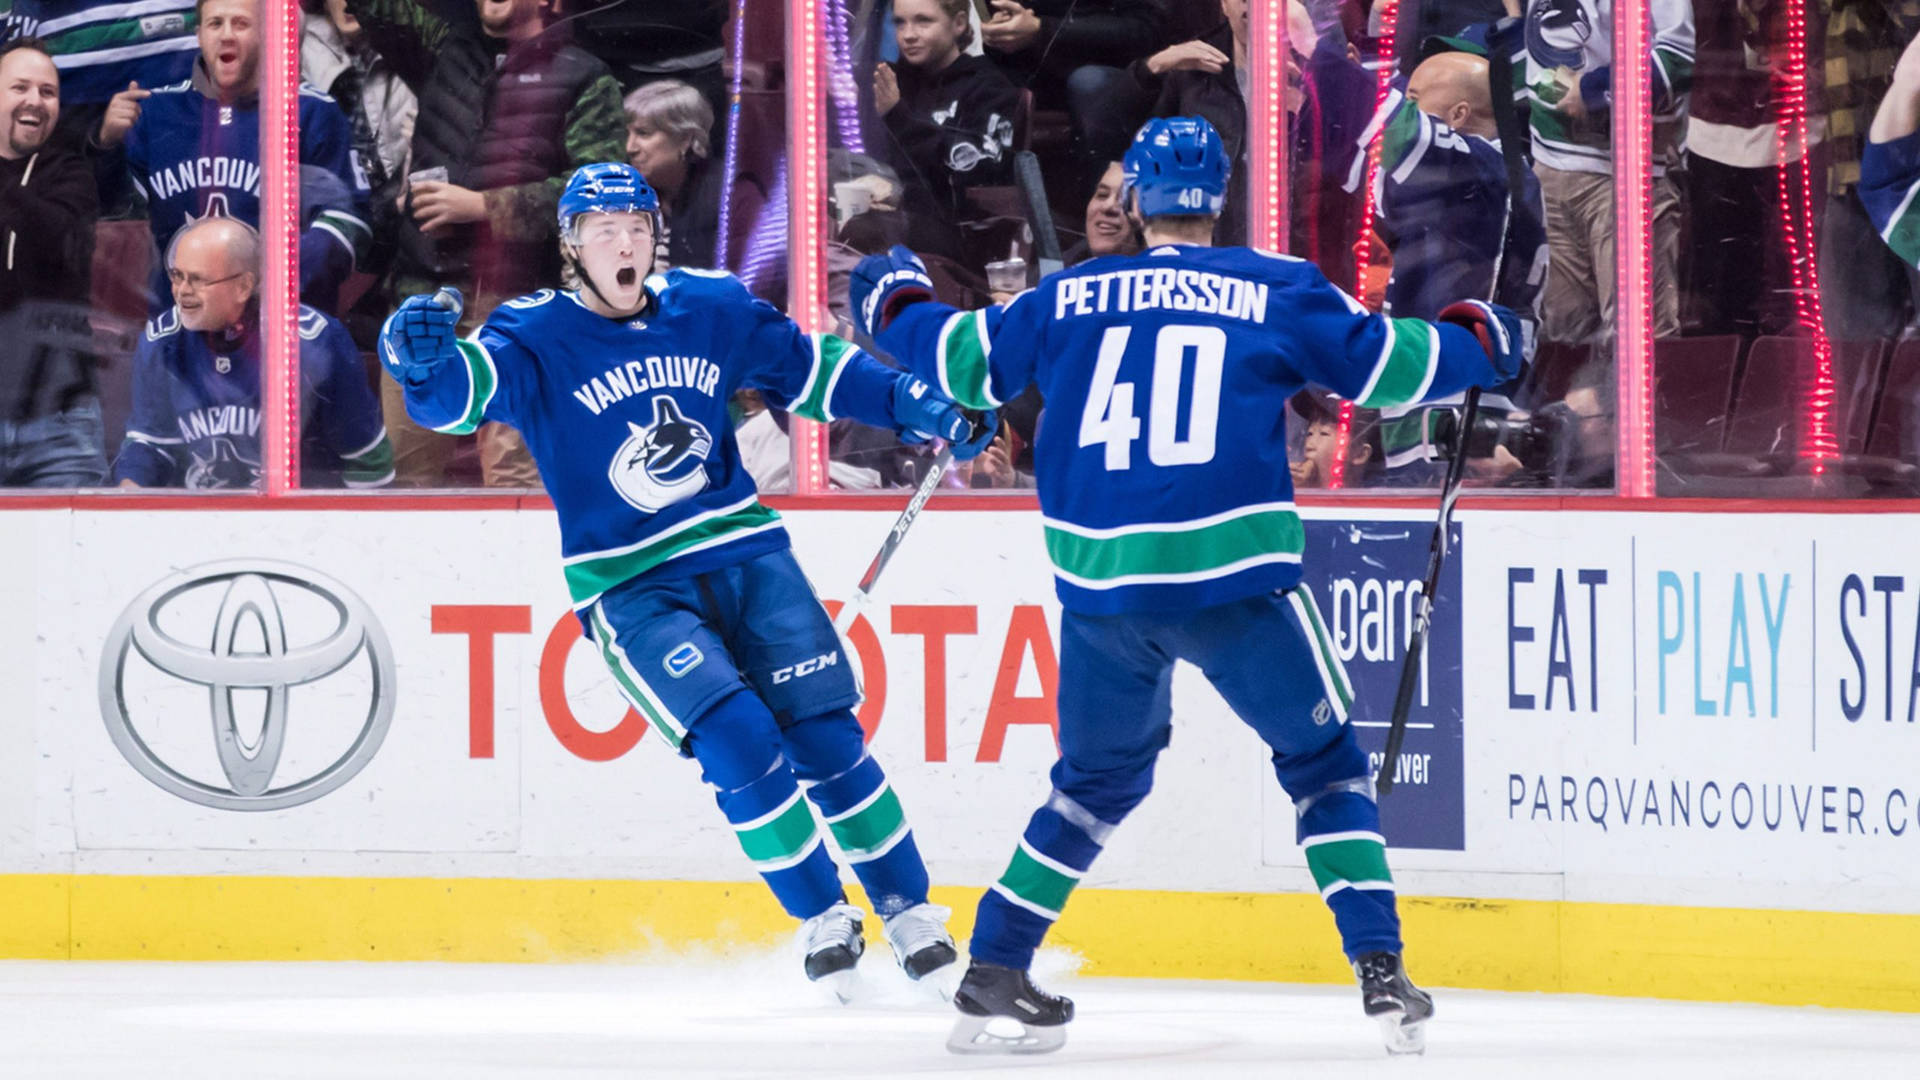 Vancouver Canucks Players Elias Pettersson And Brock Boeser